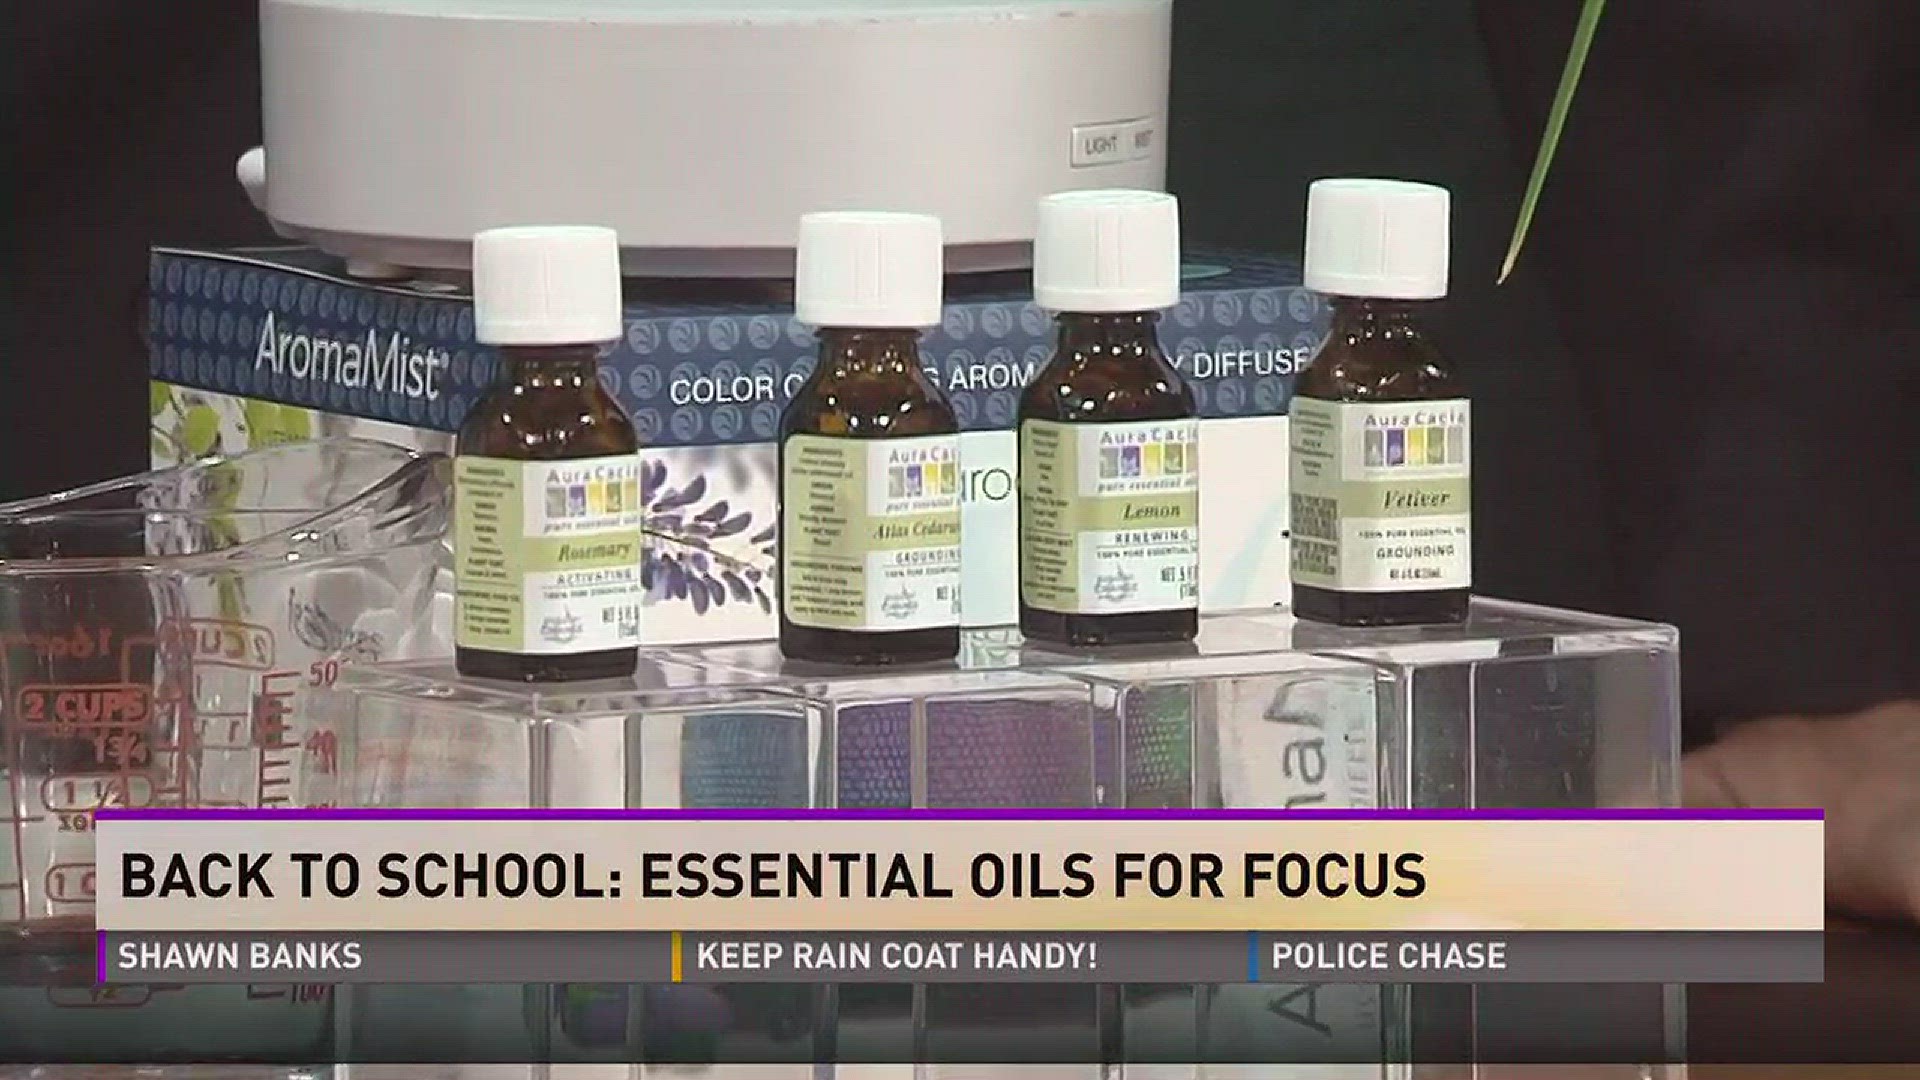 Back to School: Essential Oils for Focus